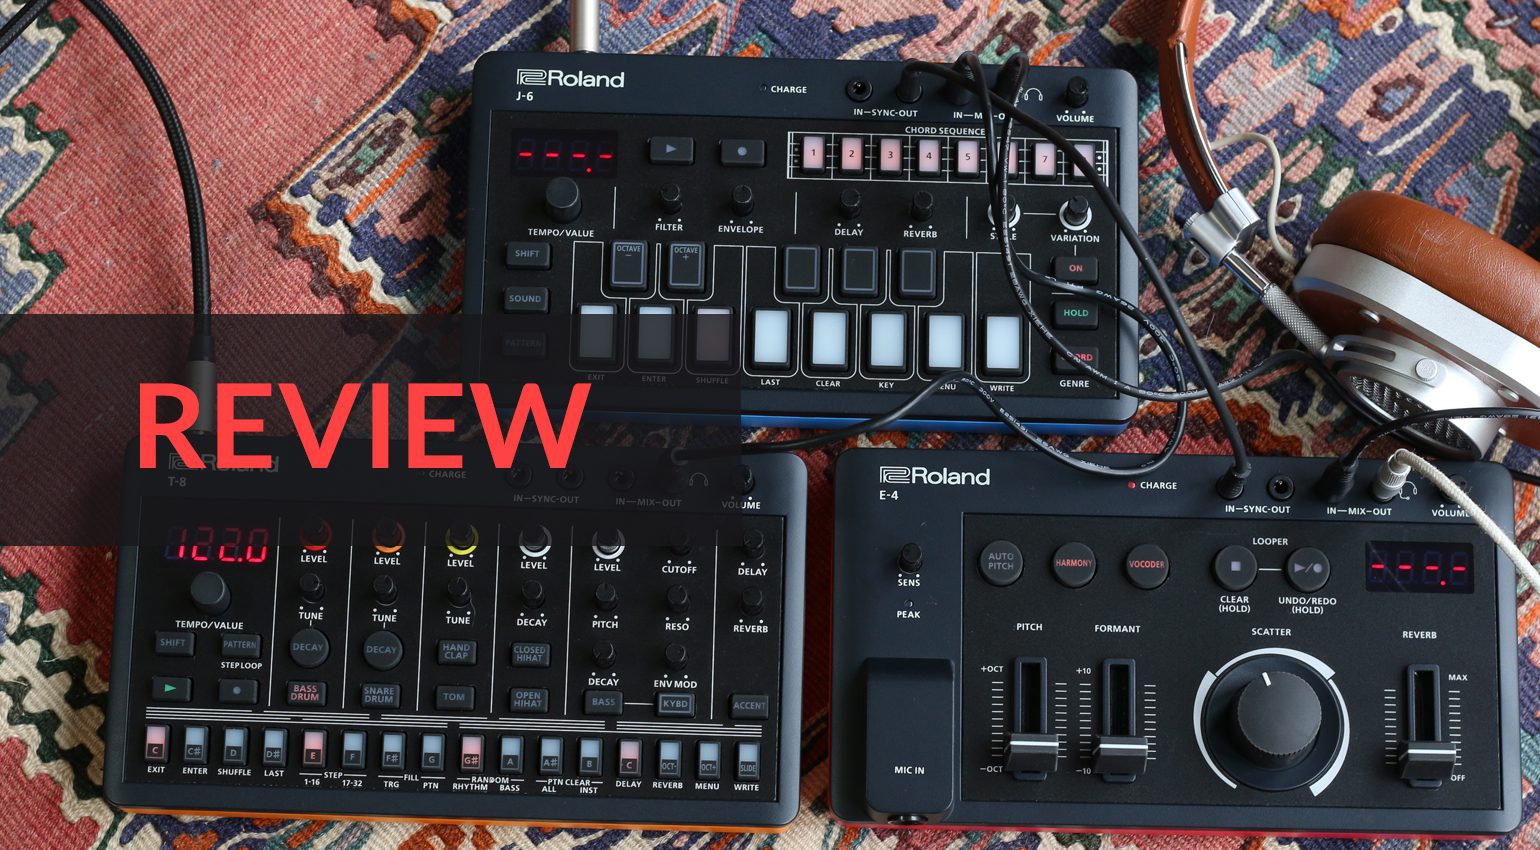 REVIEW: Roland AIRA Compact T-8, J-6 and E-4